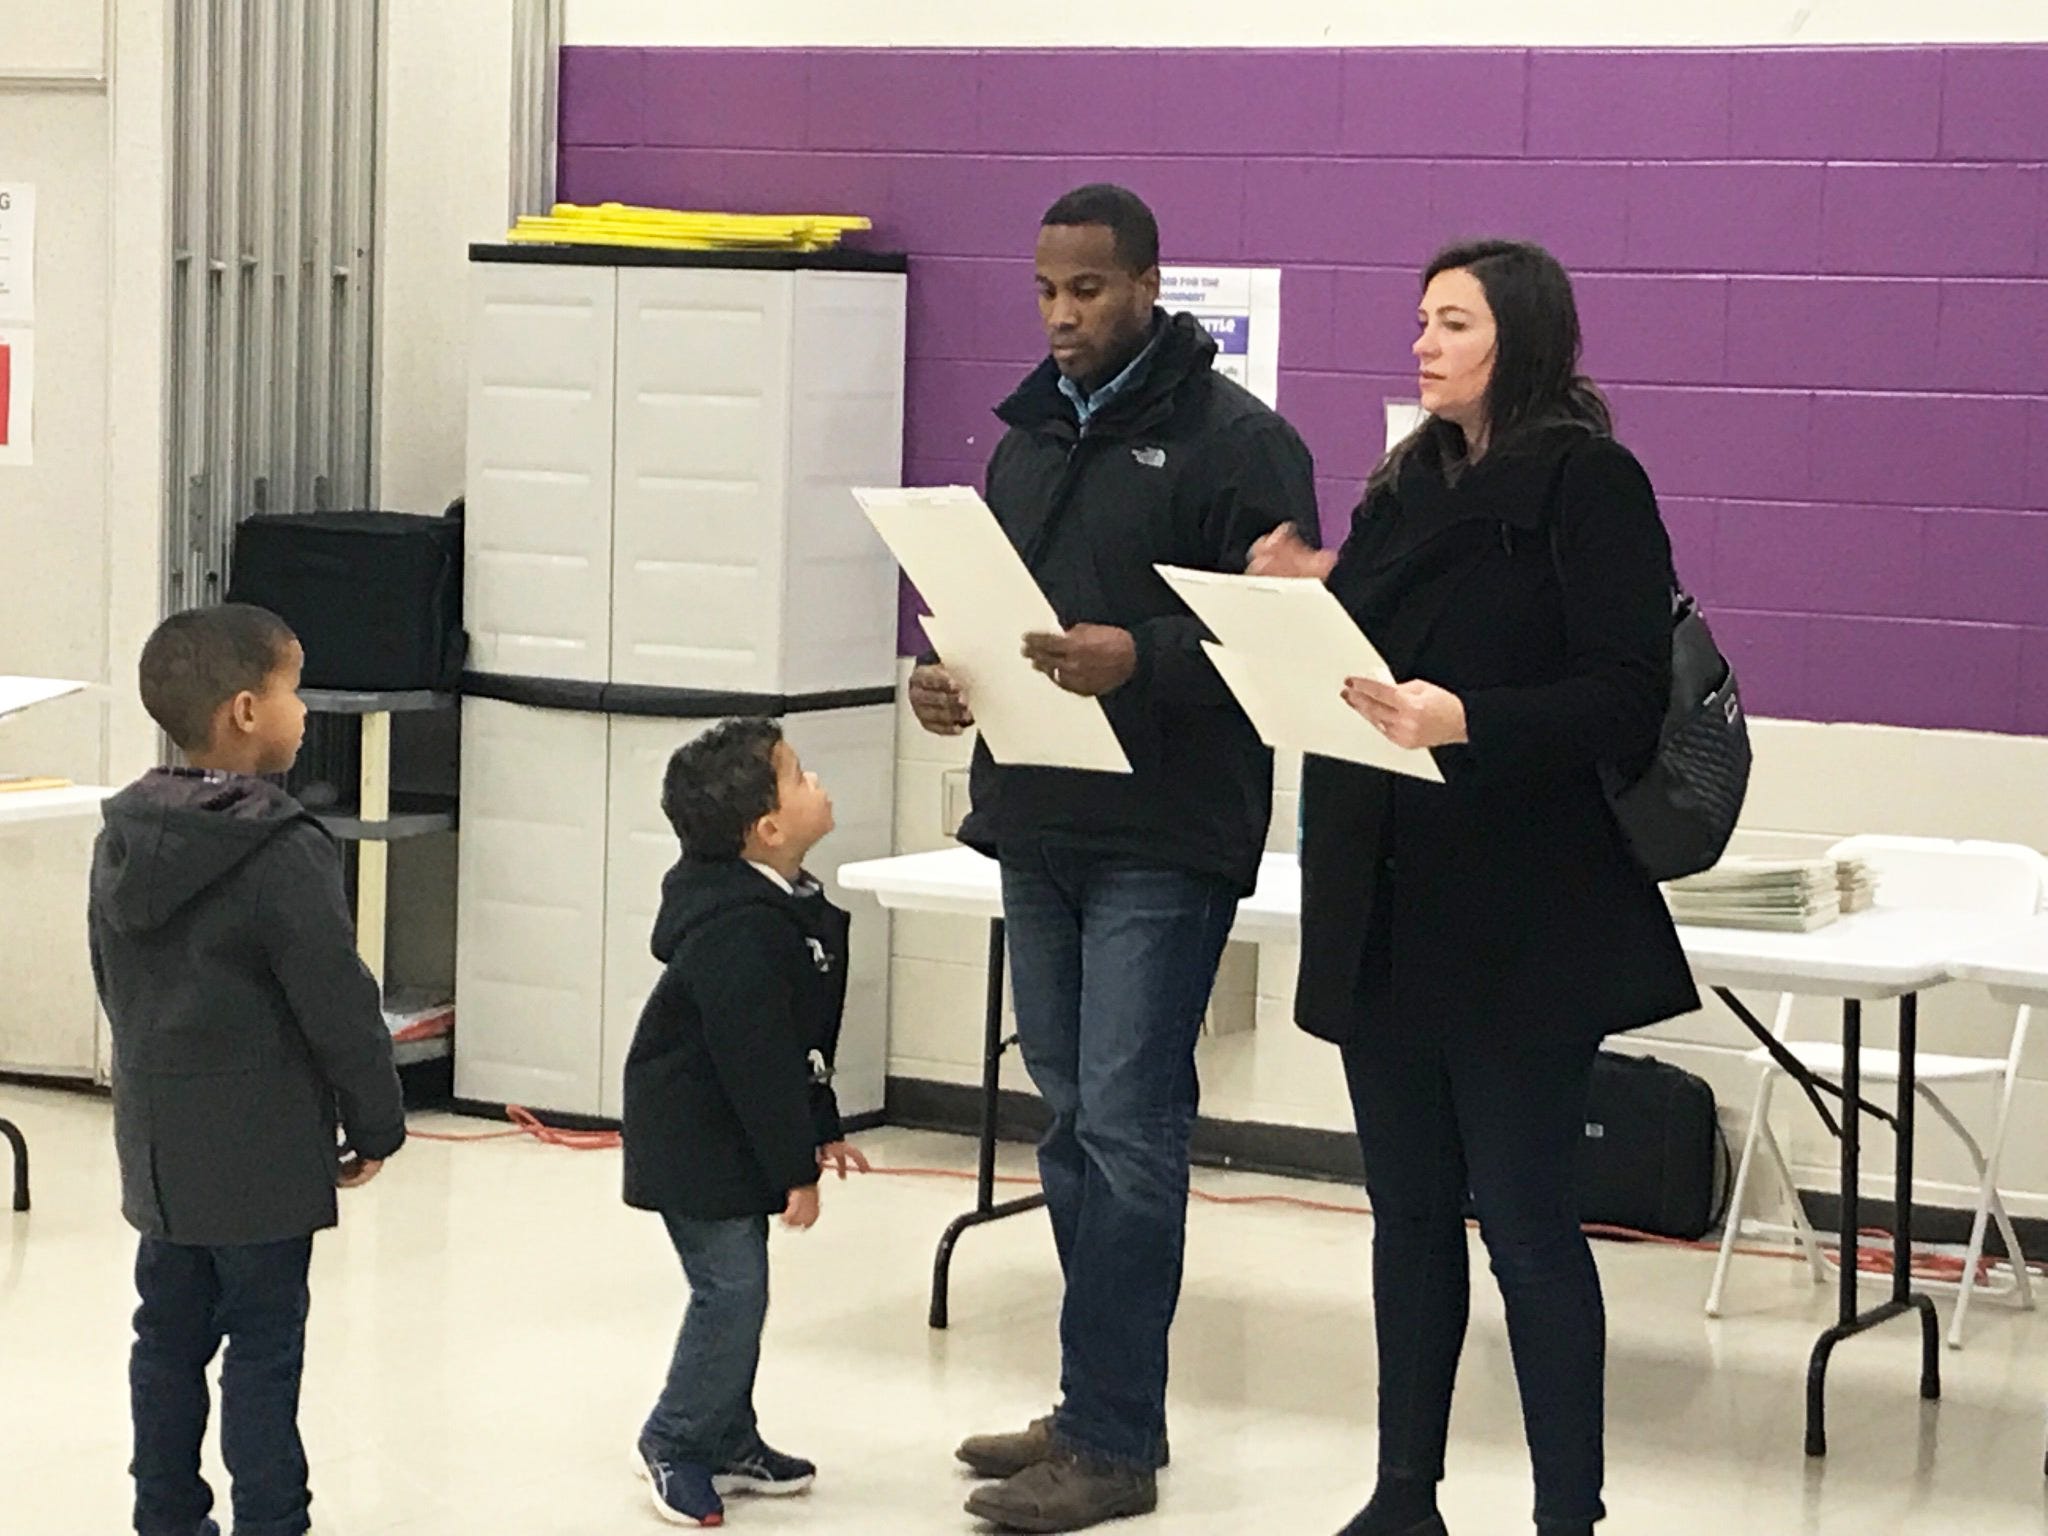 Republican U.S. Senate candidate John James votes with his wife Elizabeth and two sons Tuesday morning in Farmington Hills.